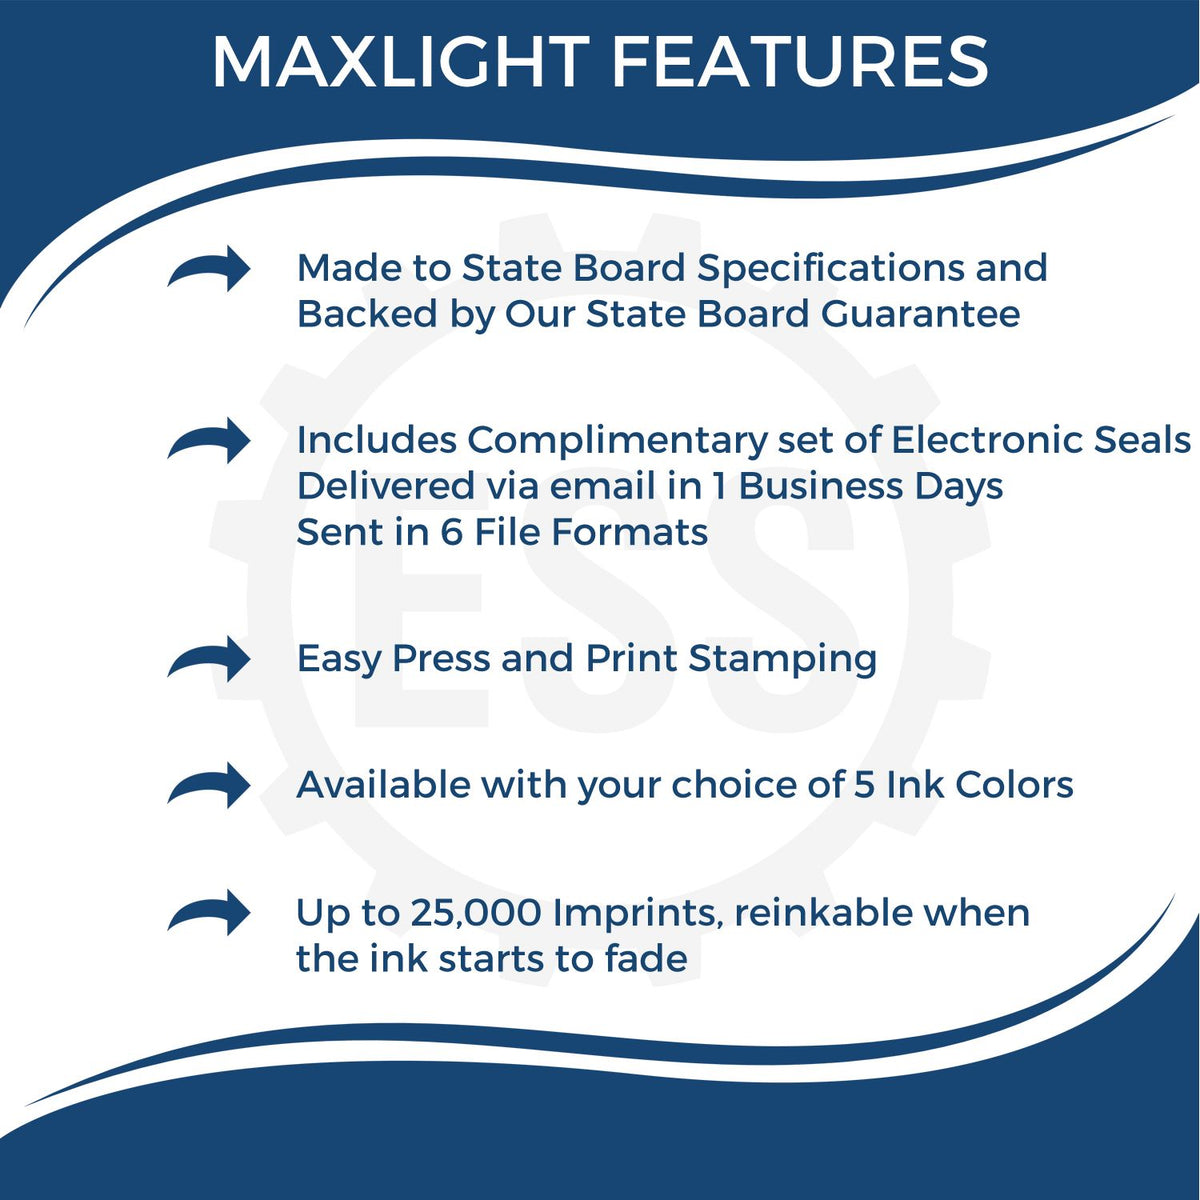 A picture of an infographic highlighting the selling points for the Premium MaxLight Pre-Inked South Carolina Engineering Stamp